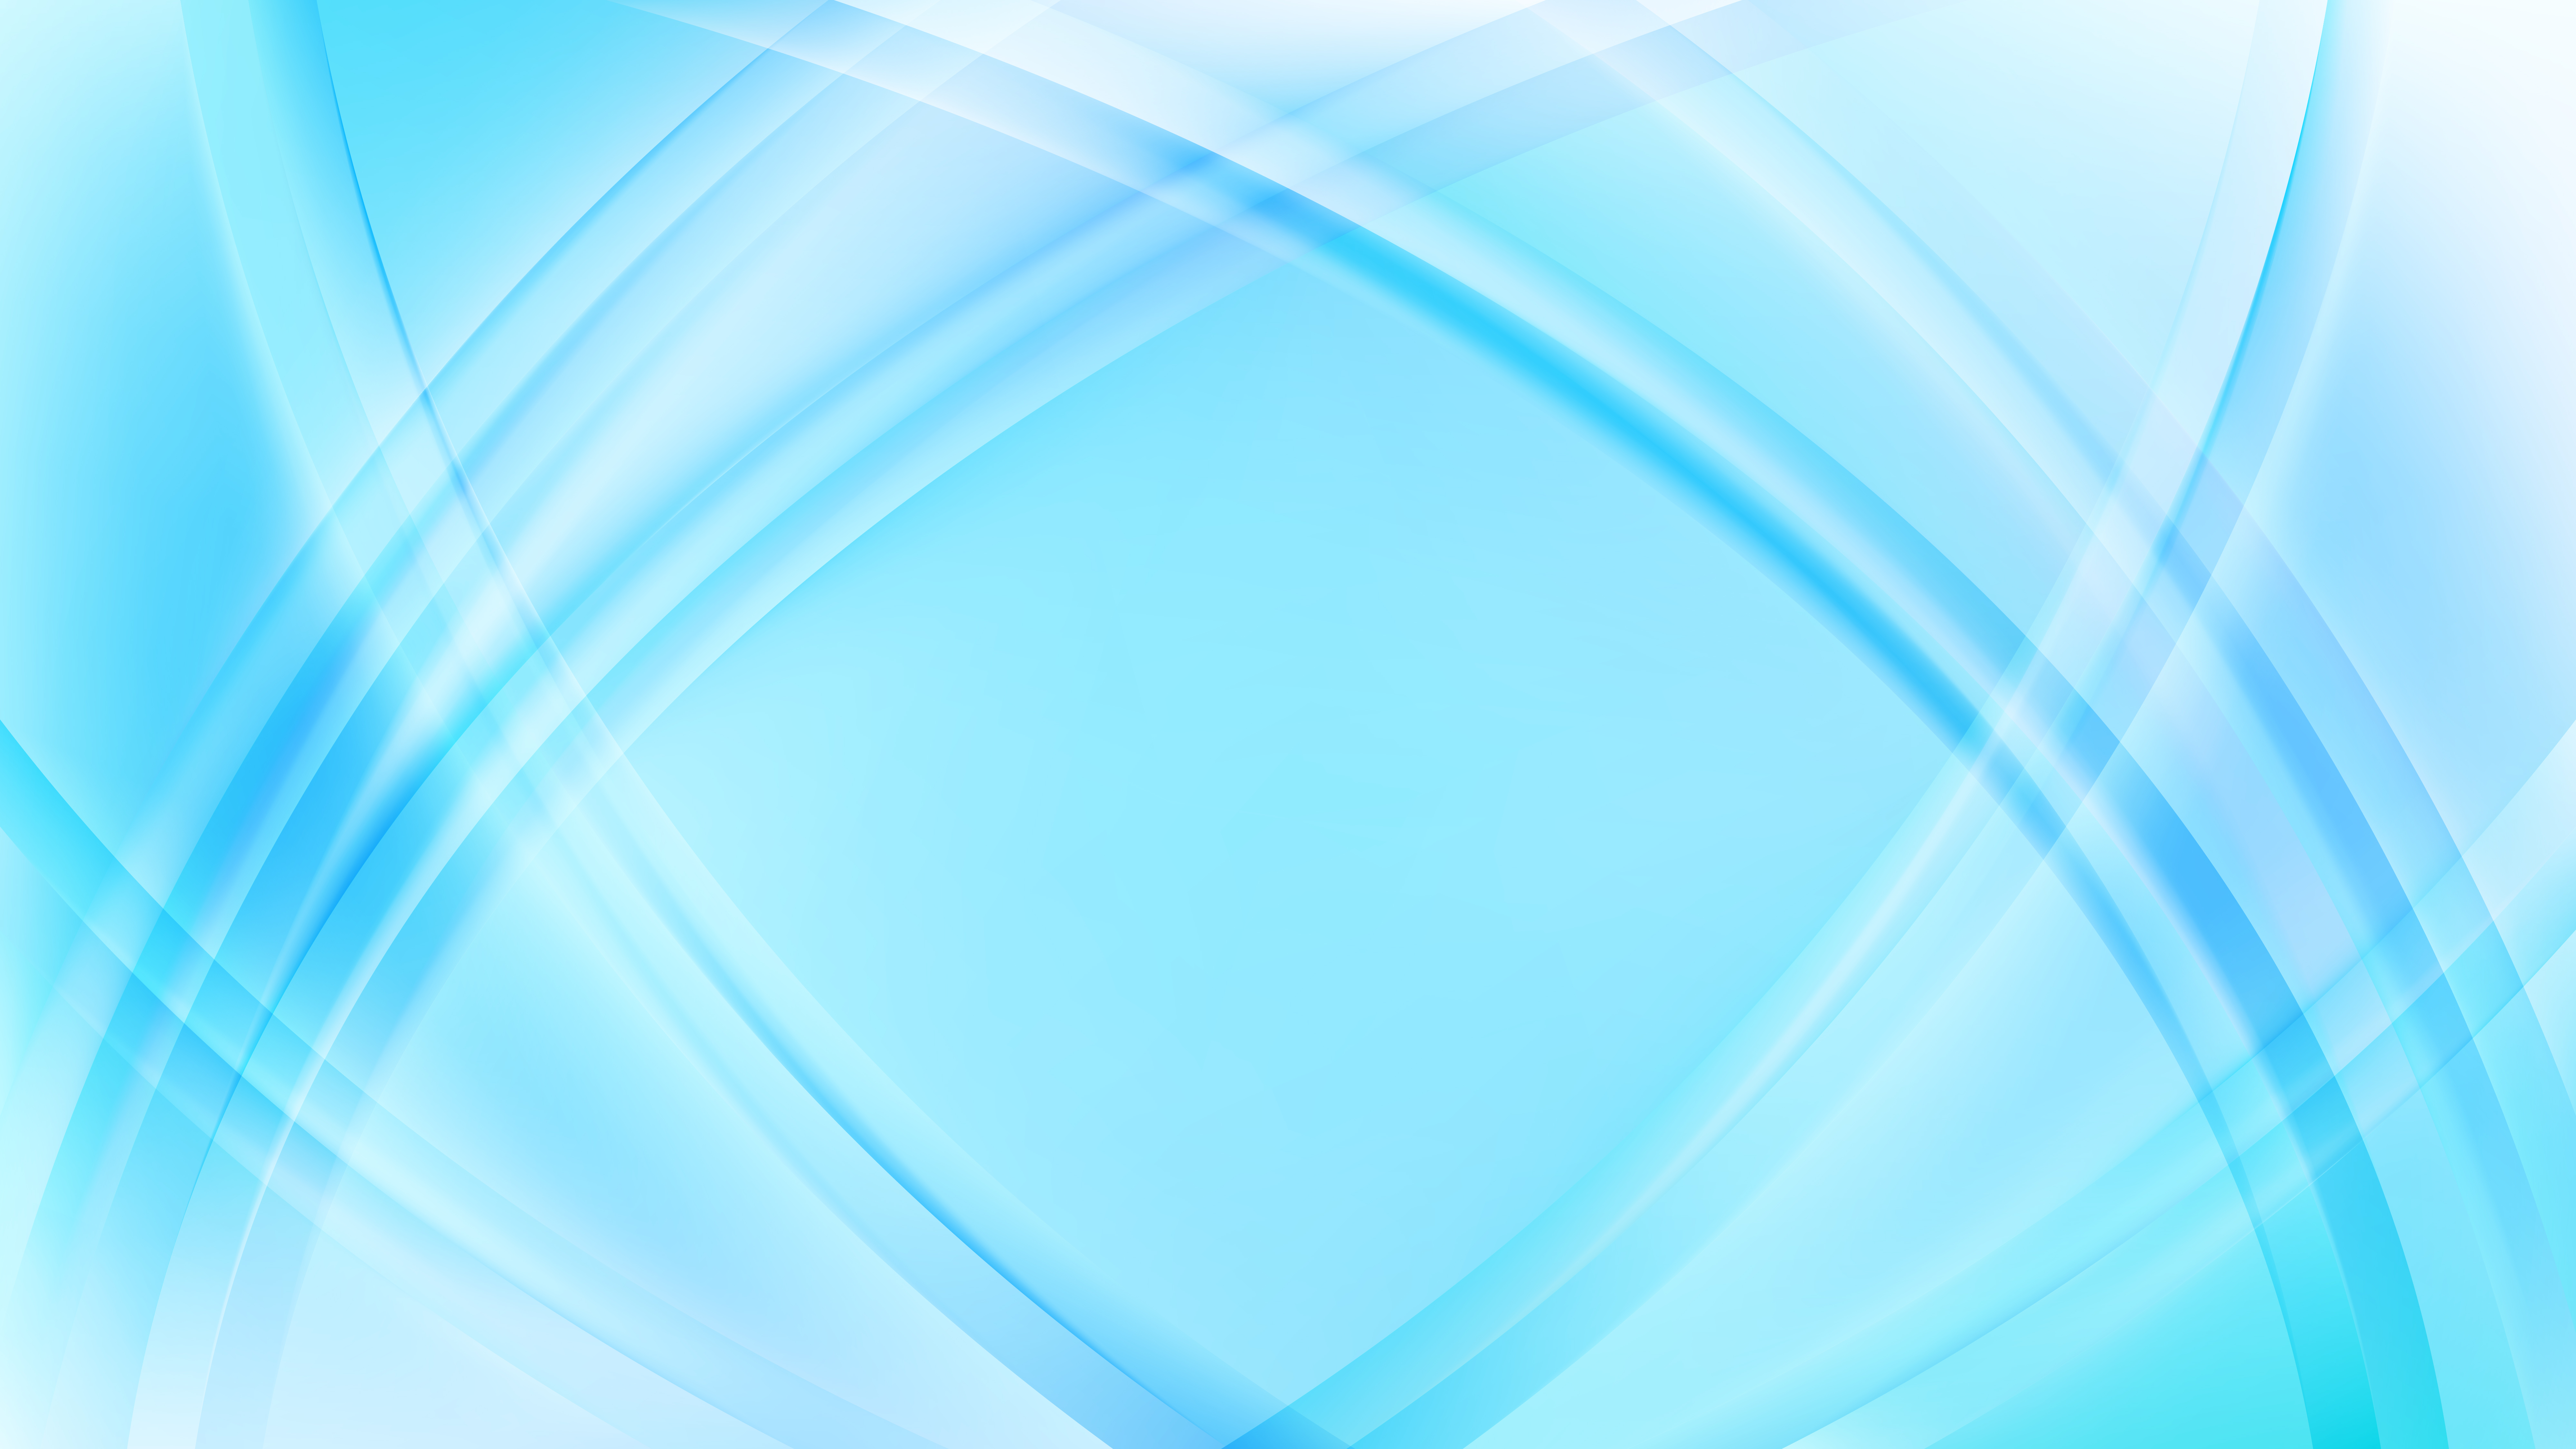 Free Abstract Light Blue Curve Background